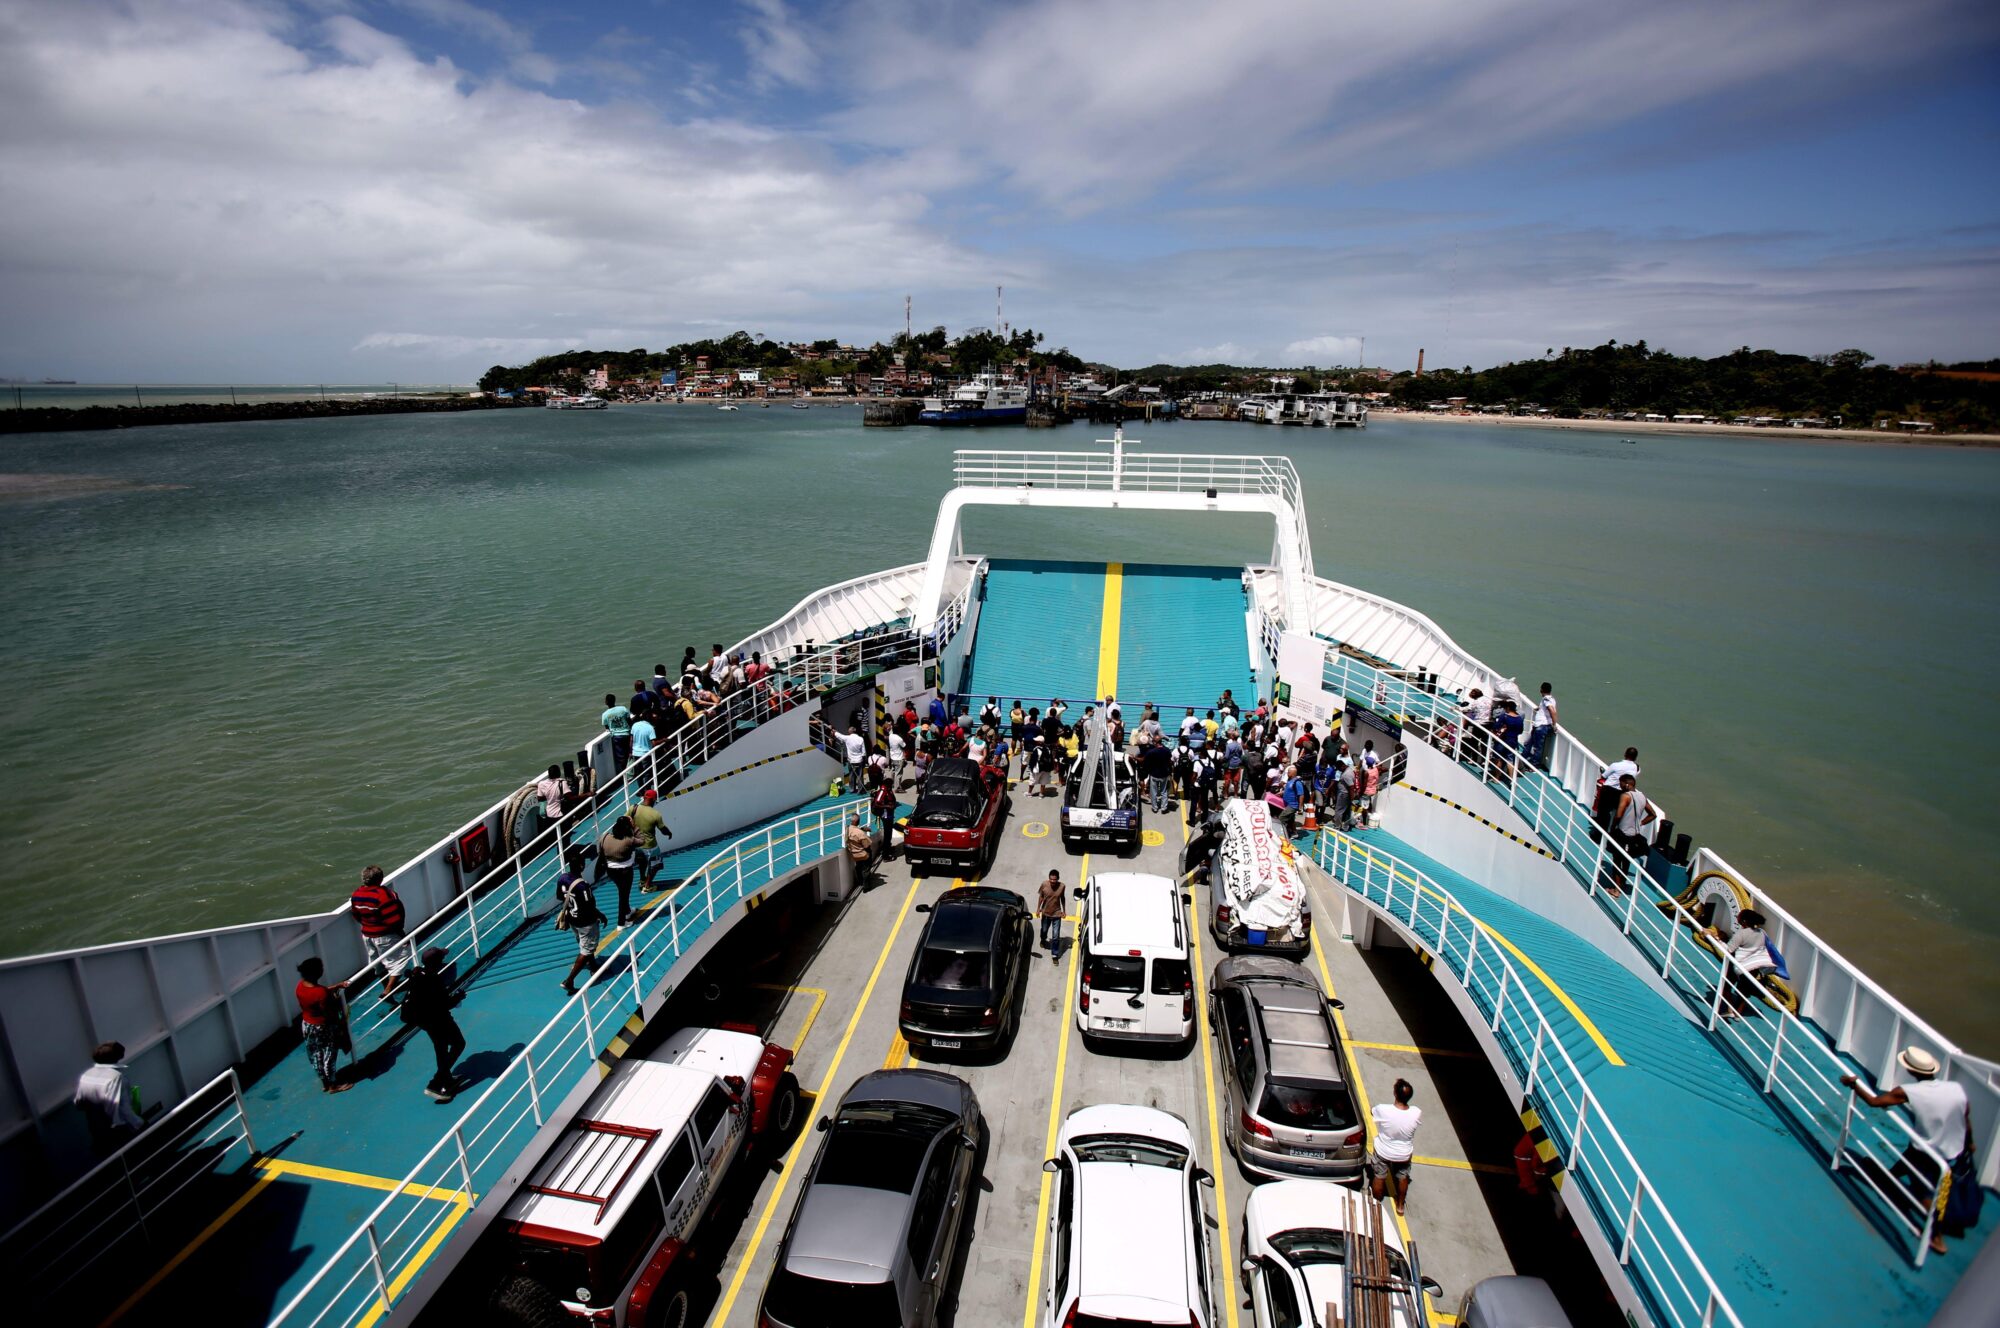 <p>A ferry crosses between Salvador and Itaparica in Bahia state, Brazil. The China Communications Construction Company (CCCC) has signed to build a road bridge between the two locations, but the project appears to have stalled (Image: Panther Media / Alamy)</p>